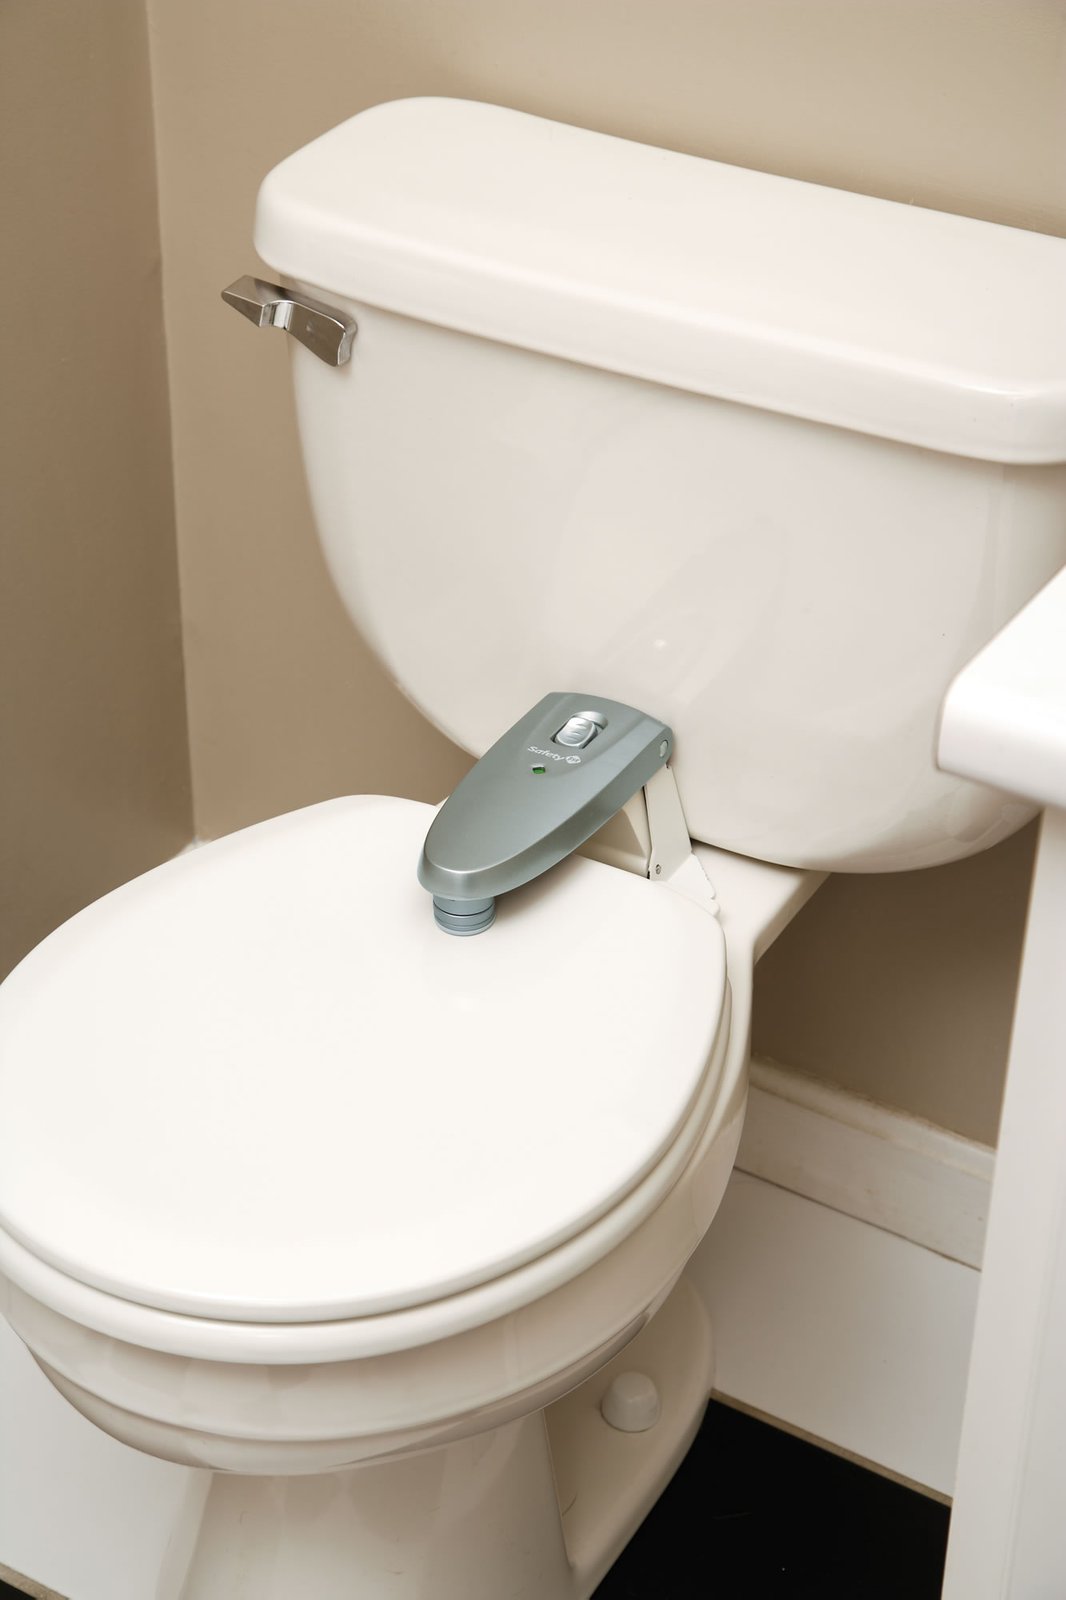 A toilet lock will help keep your baby from having the lid close on his fingers and from being exposed to harmful germs.